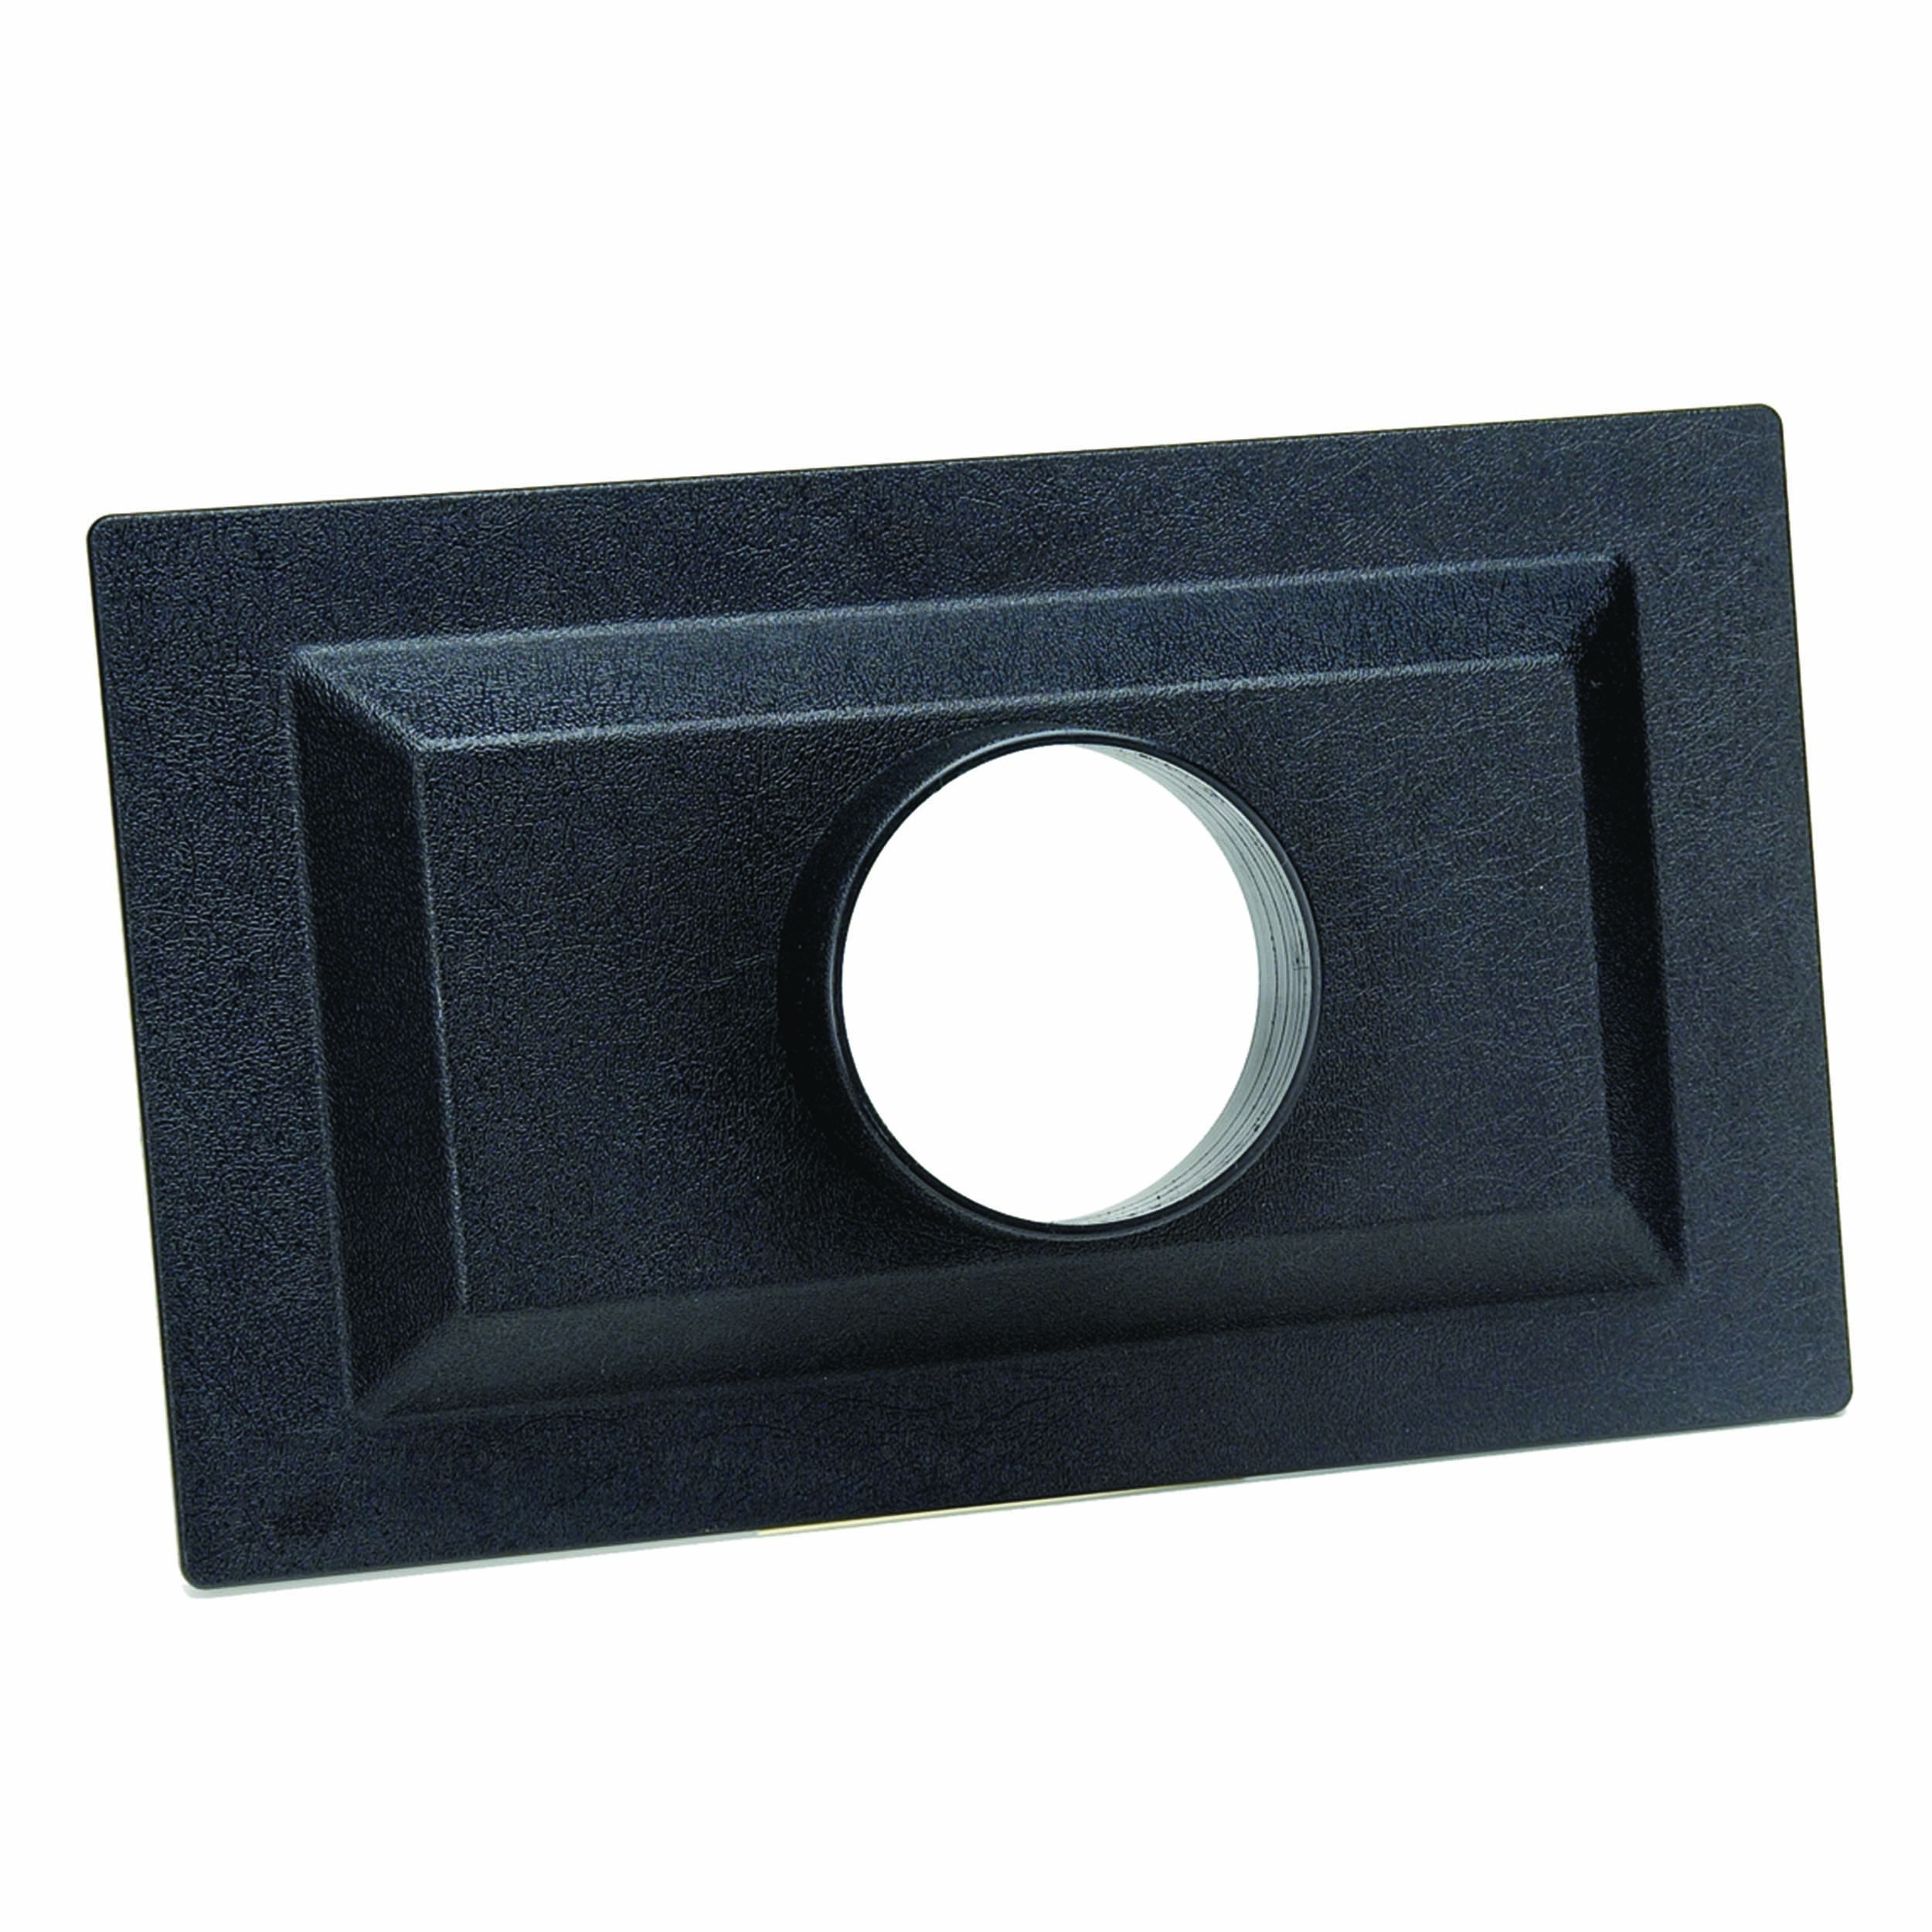 Flanged Dust Port 13-1/2" X 8"